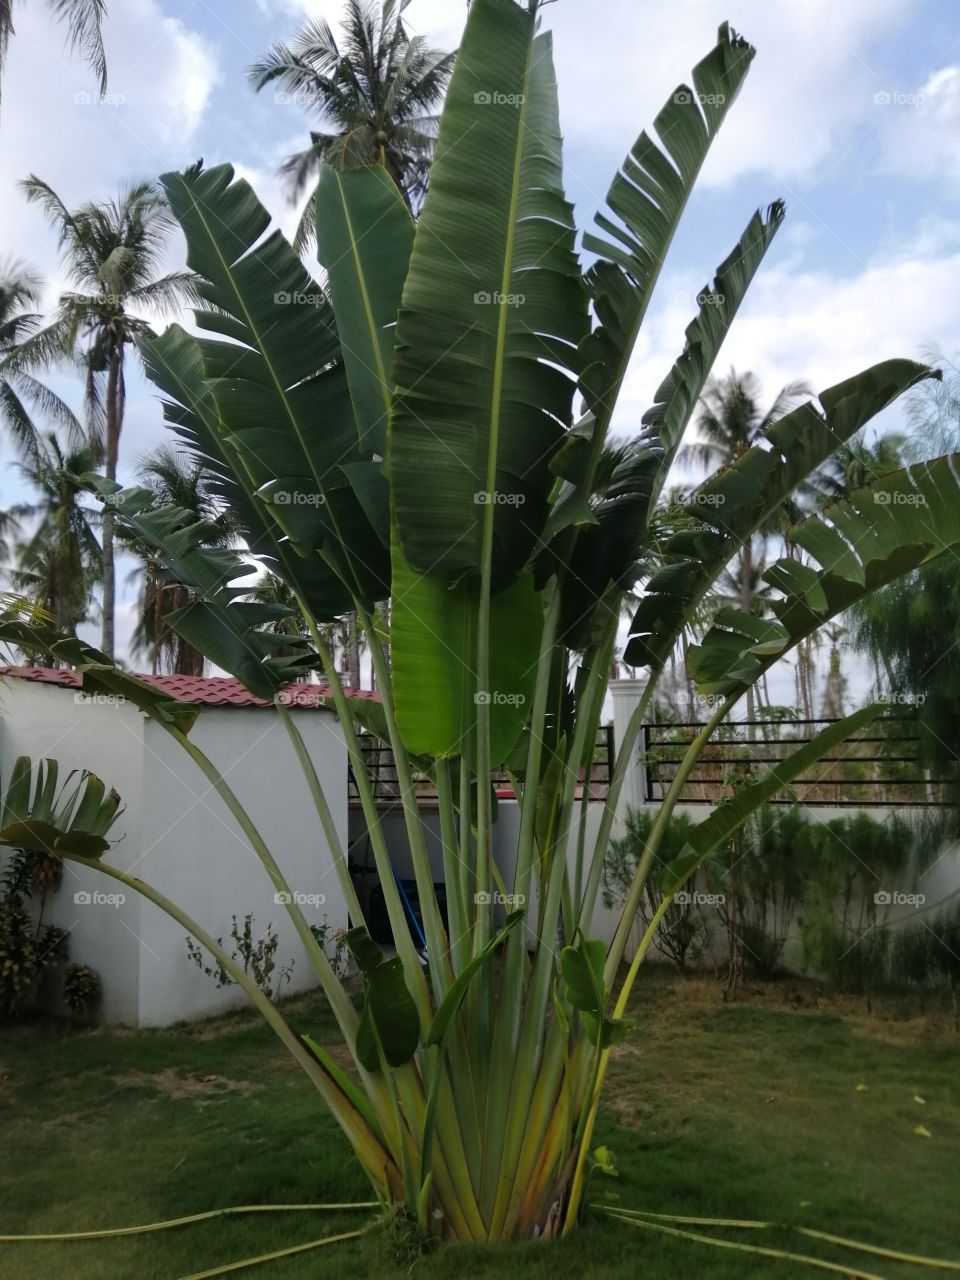 The traveler plant.
It's looks like a banana tree.
The leaves the same in banana.